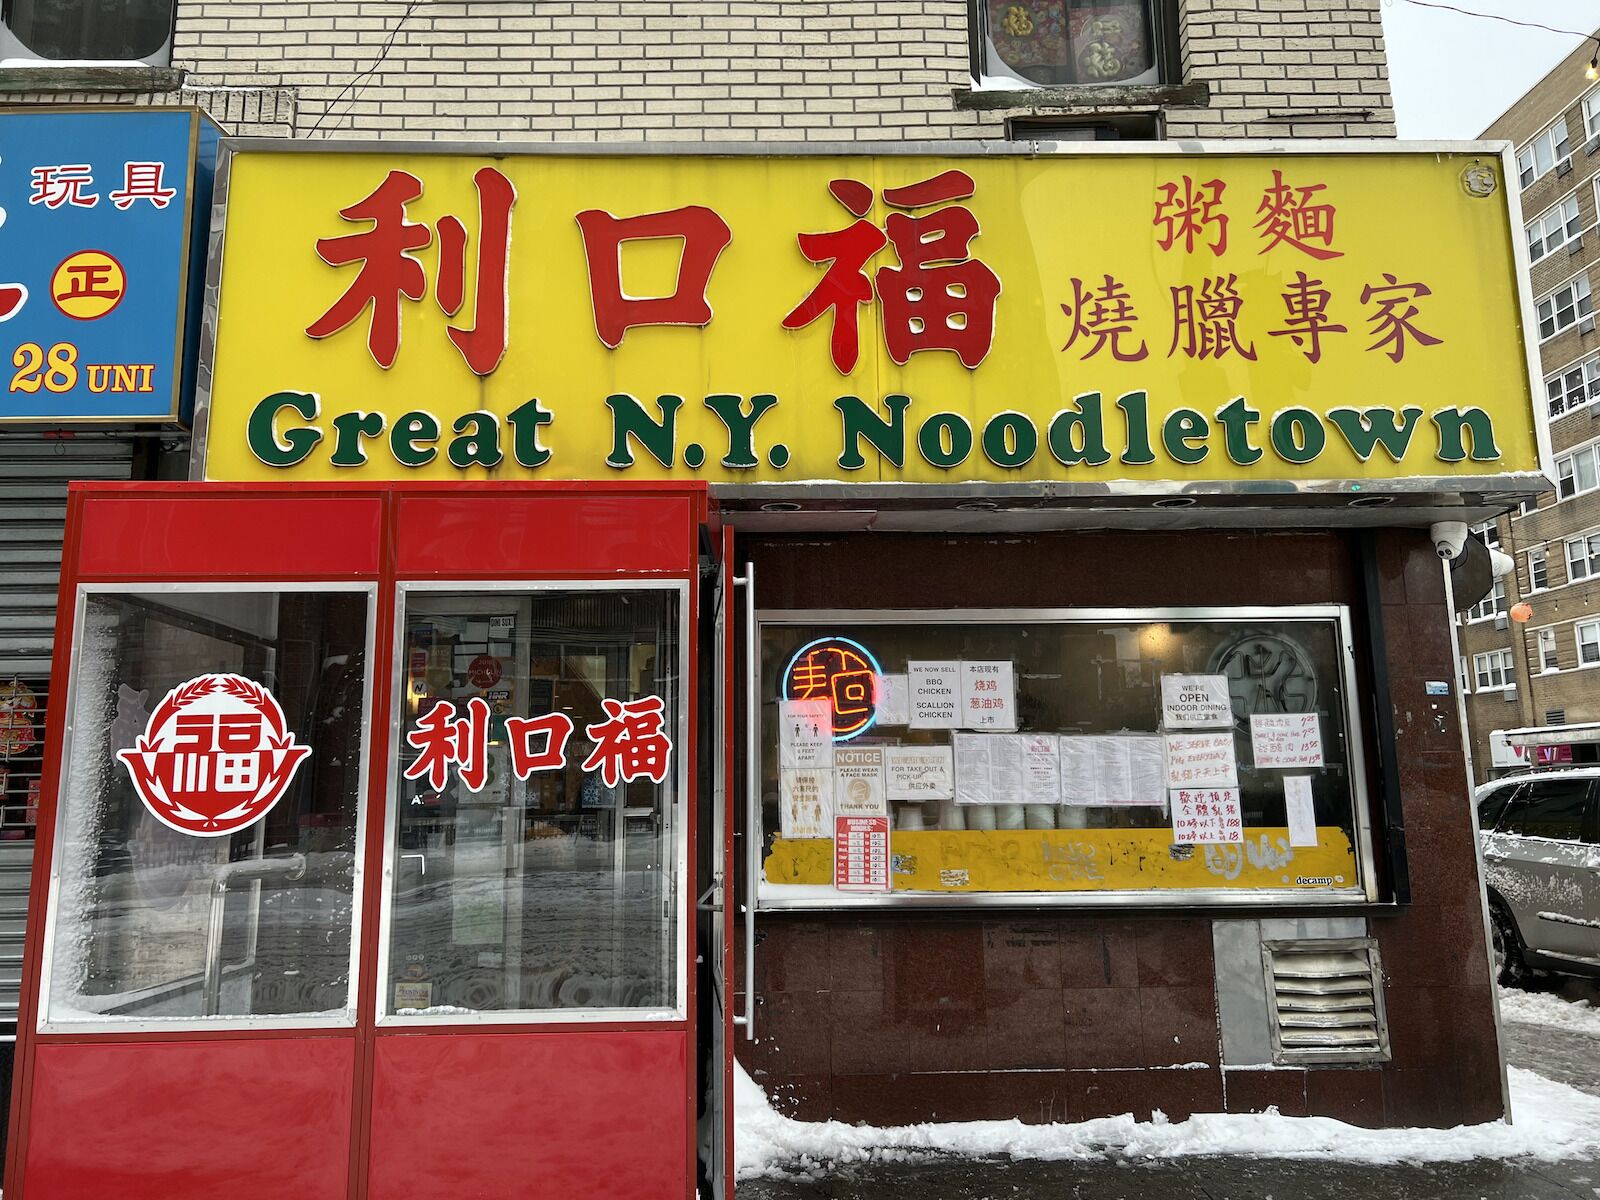 The exterior of Great NY Noodletown with red doors and a yellow sign